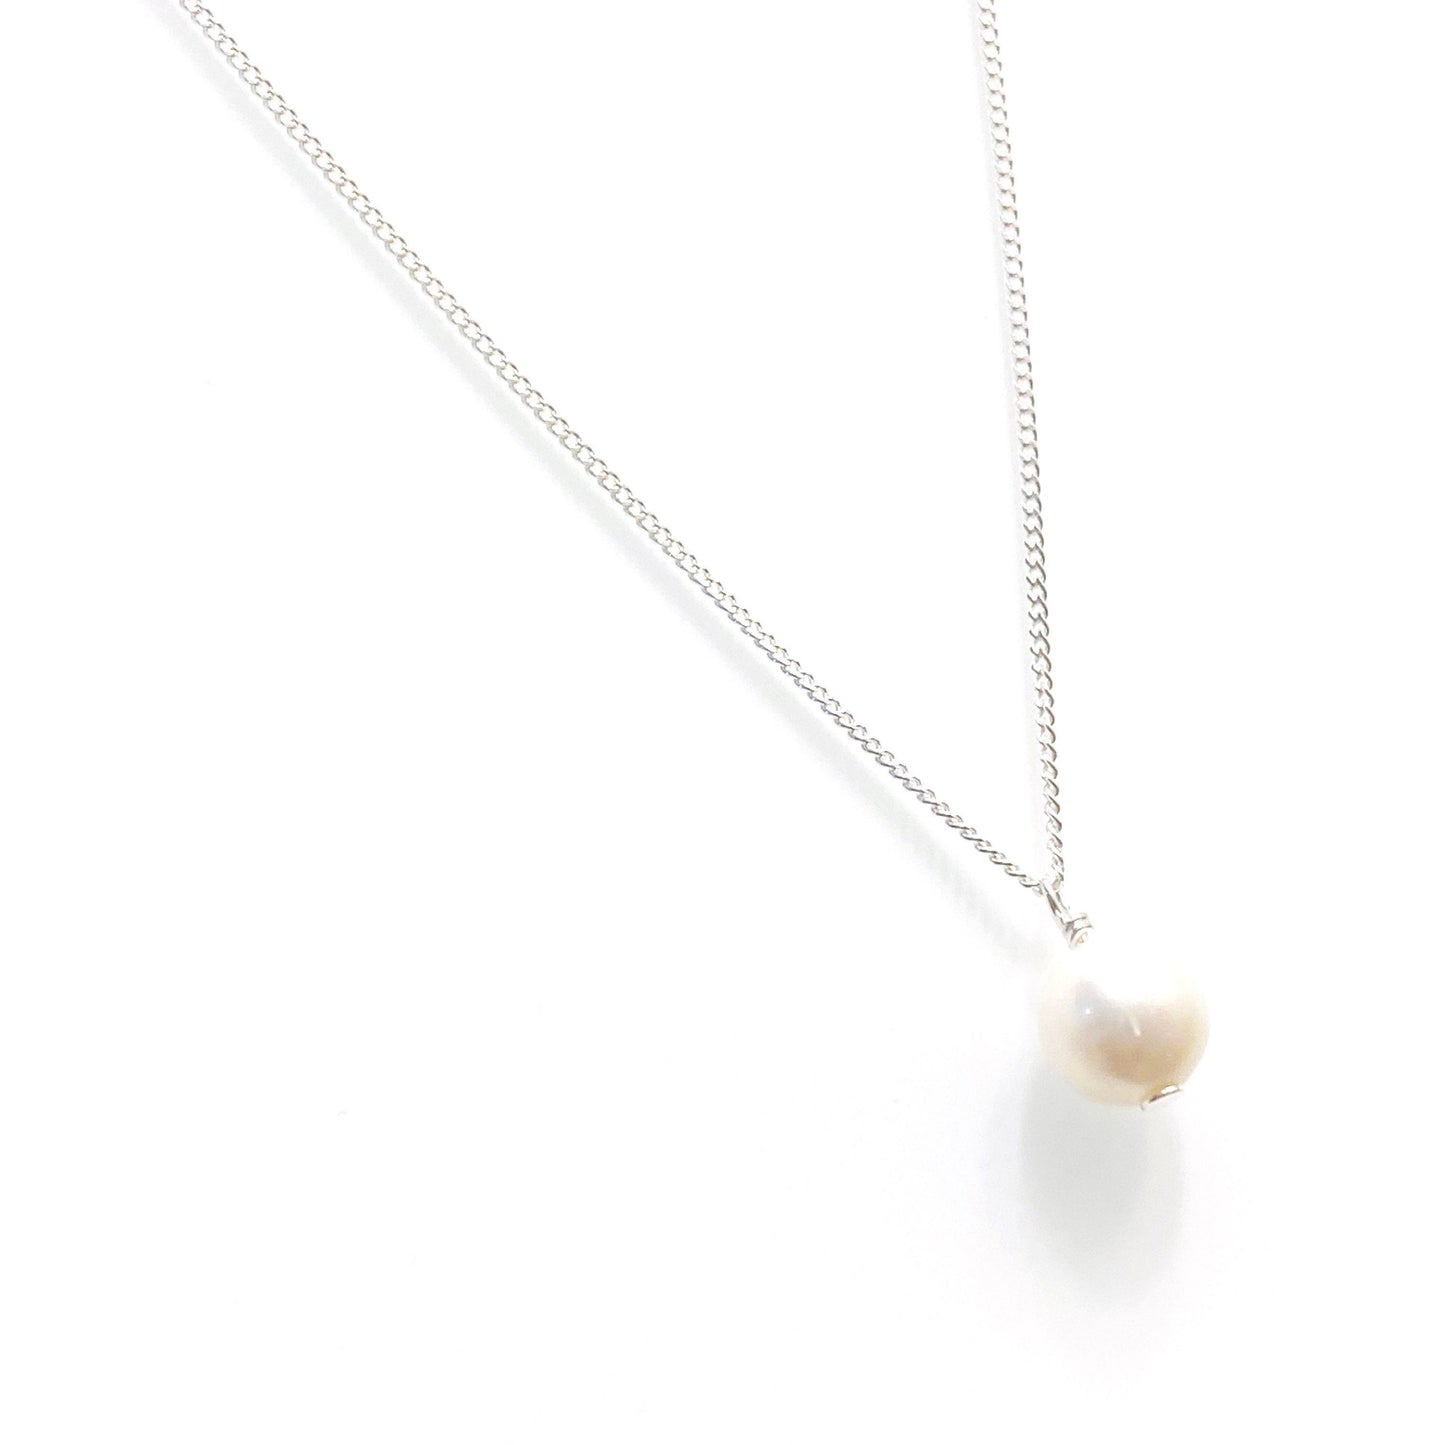 Minimalist pearl necklace (sterling silver and 14K gold-filled)